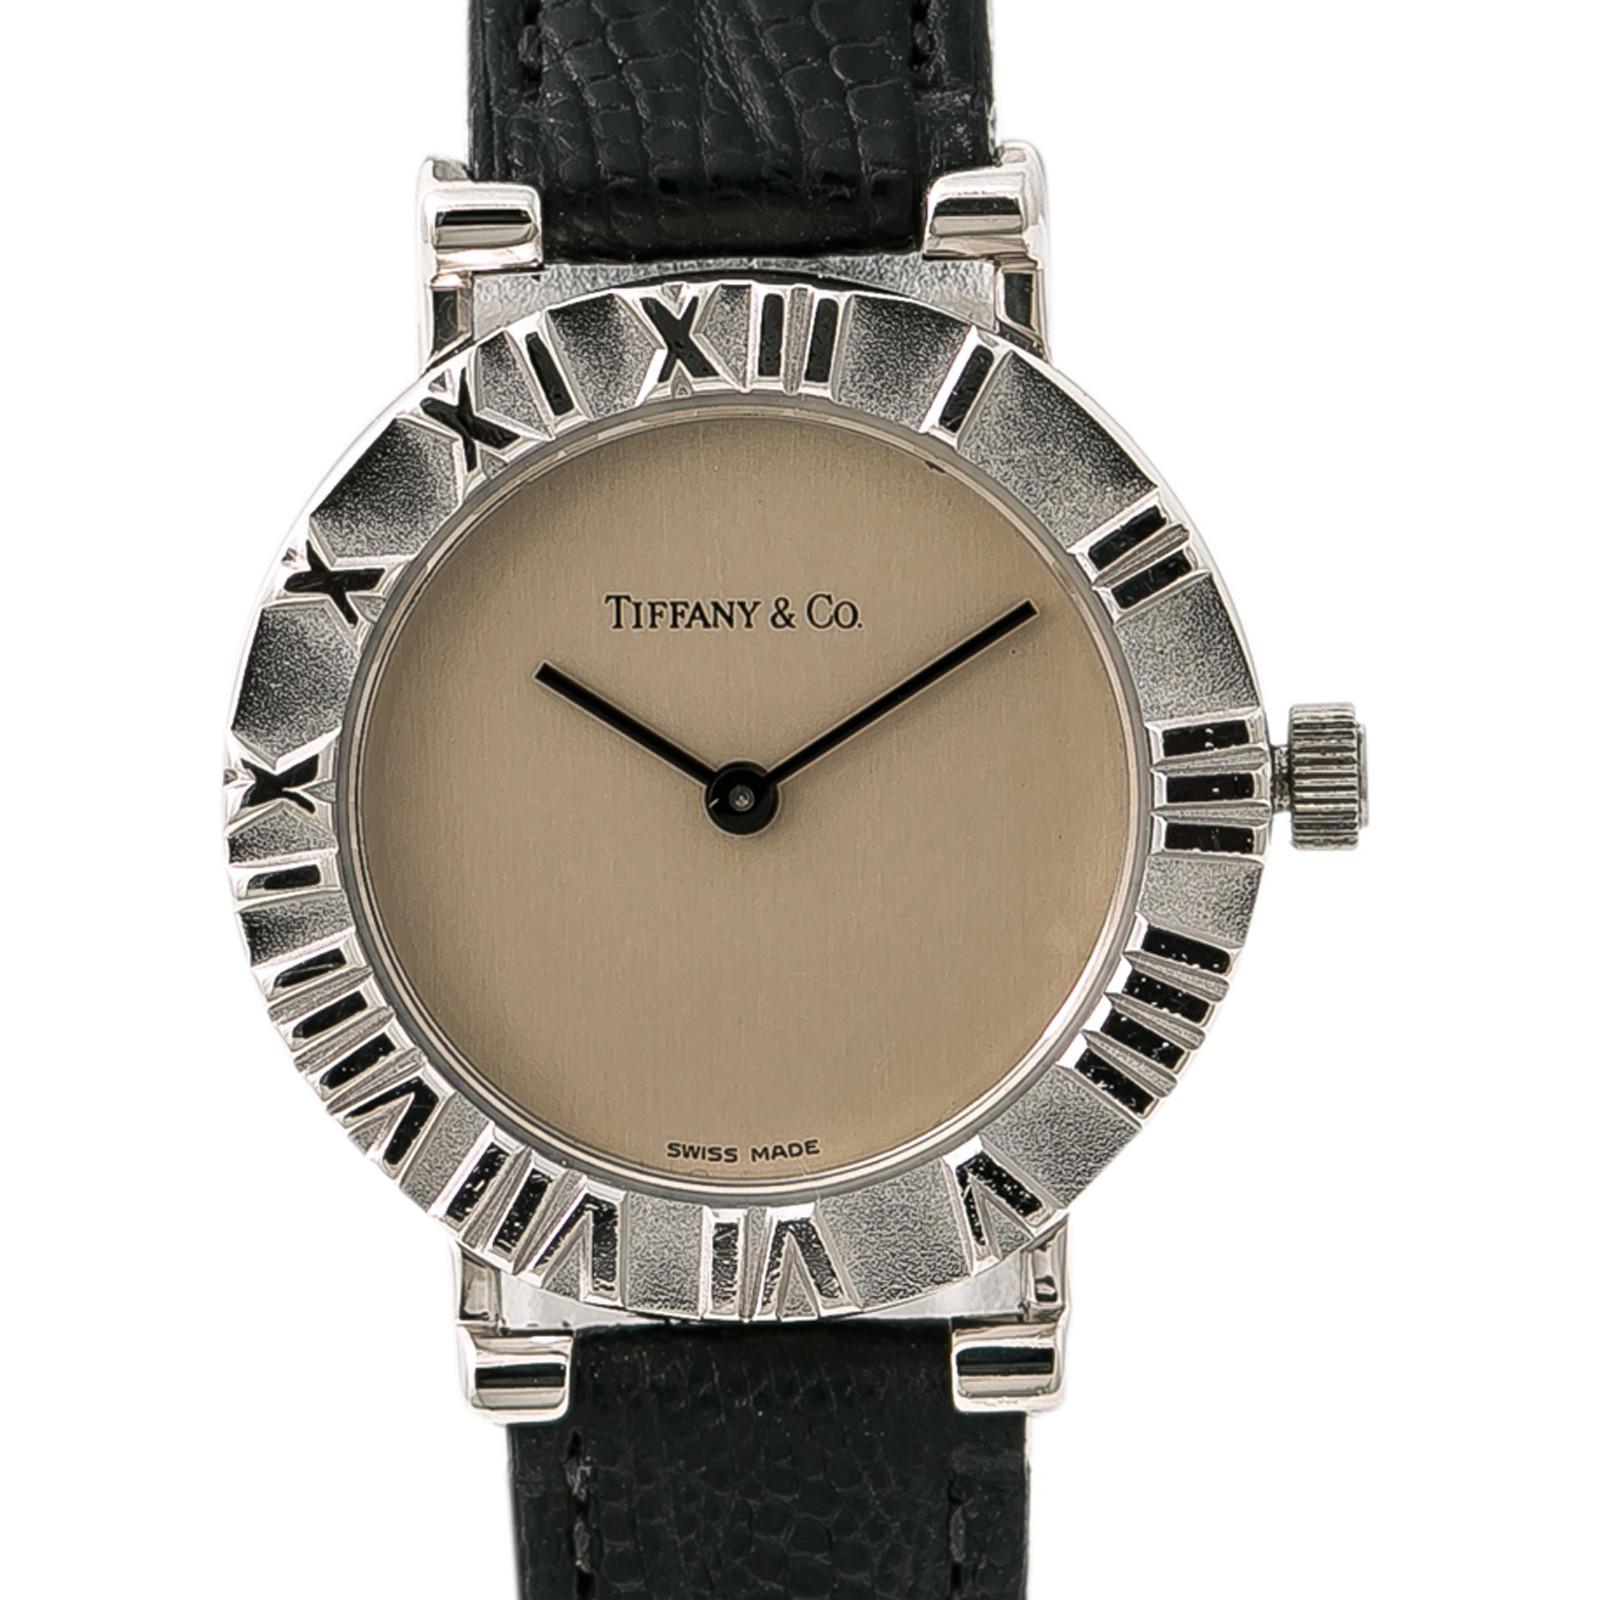 Contemporary Tiffany & Co. Atlas L0640, Silver Dial Certified Authentic